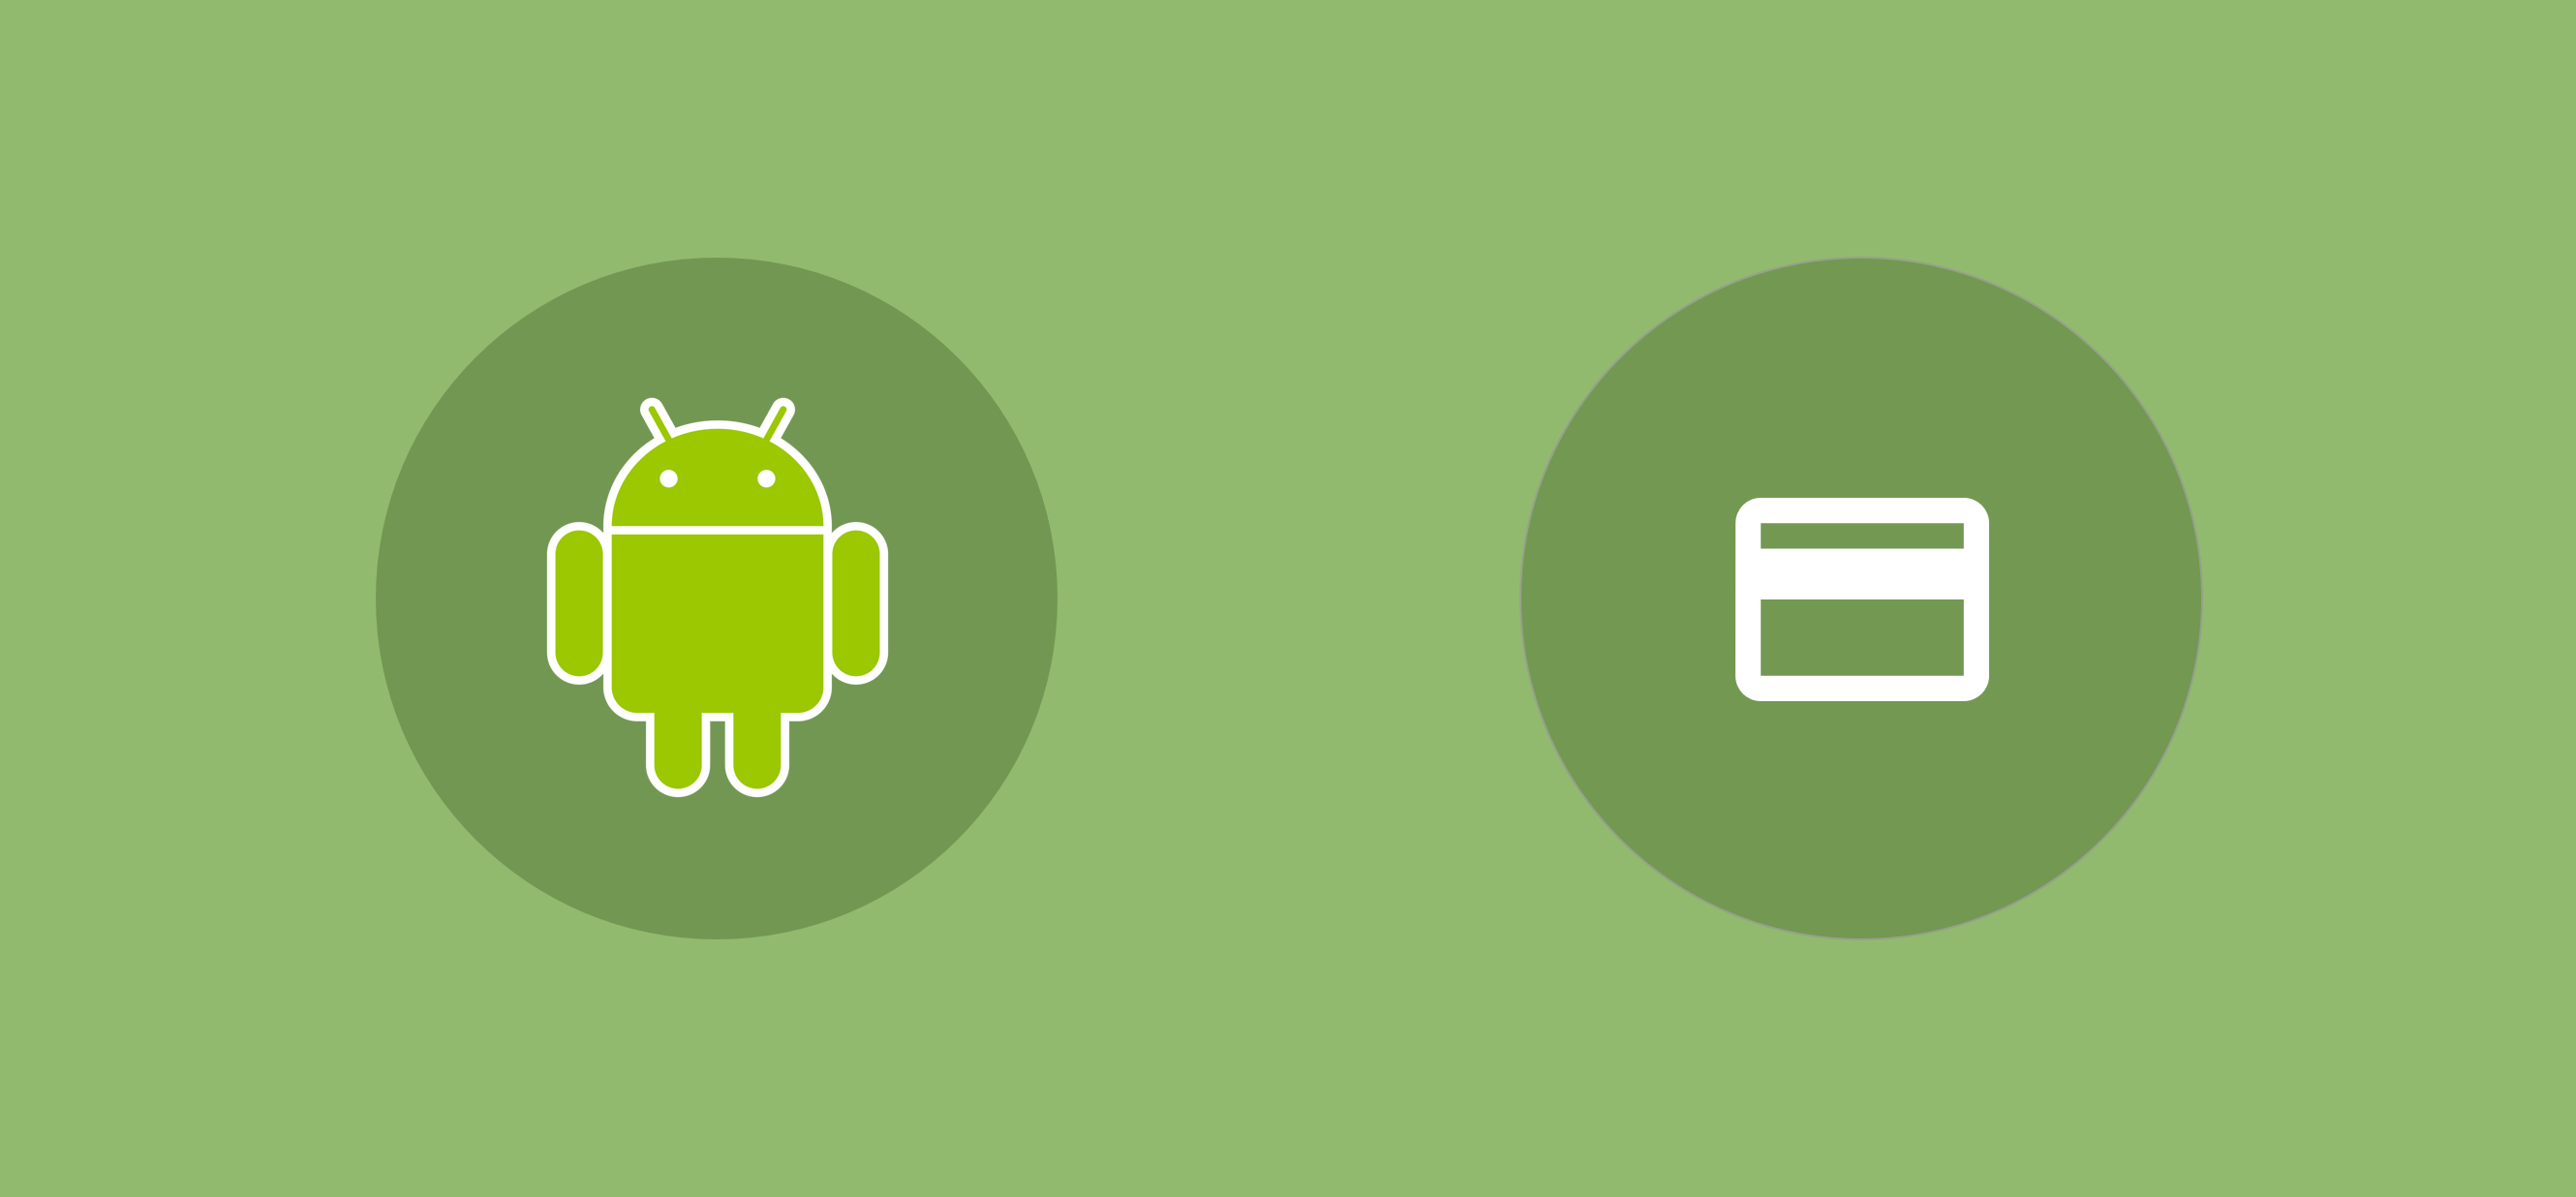 Handling pricing changes with the Google Play Billing Library